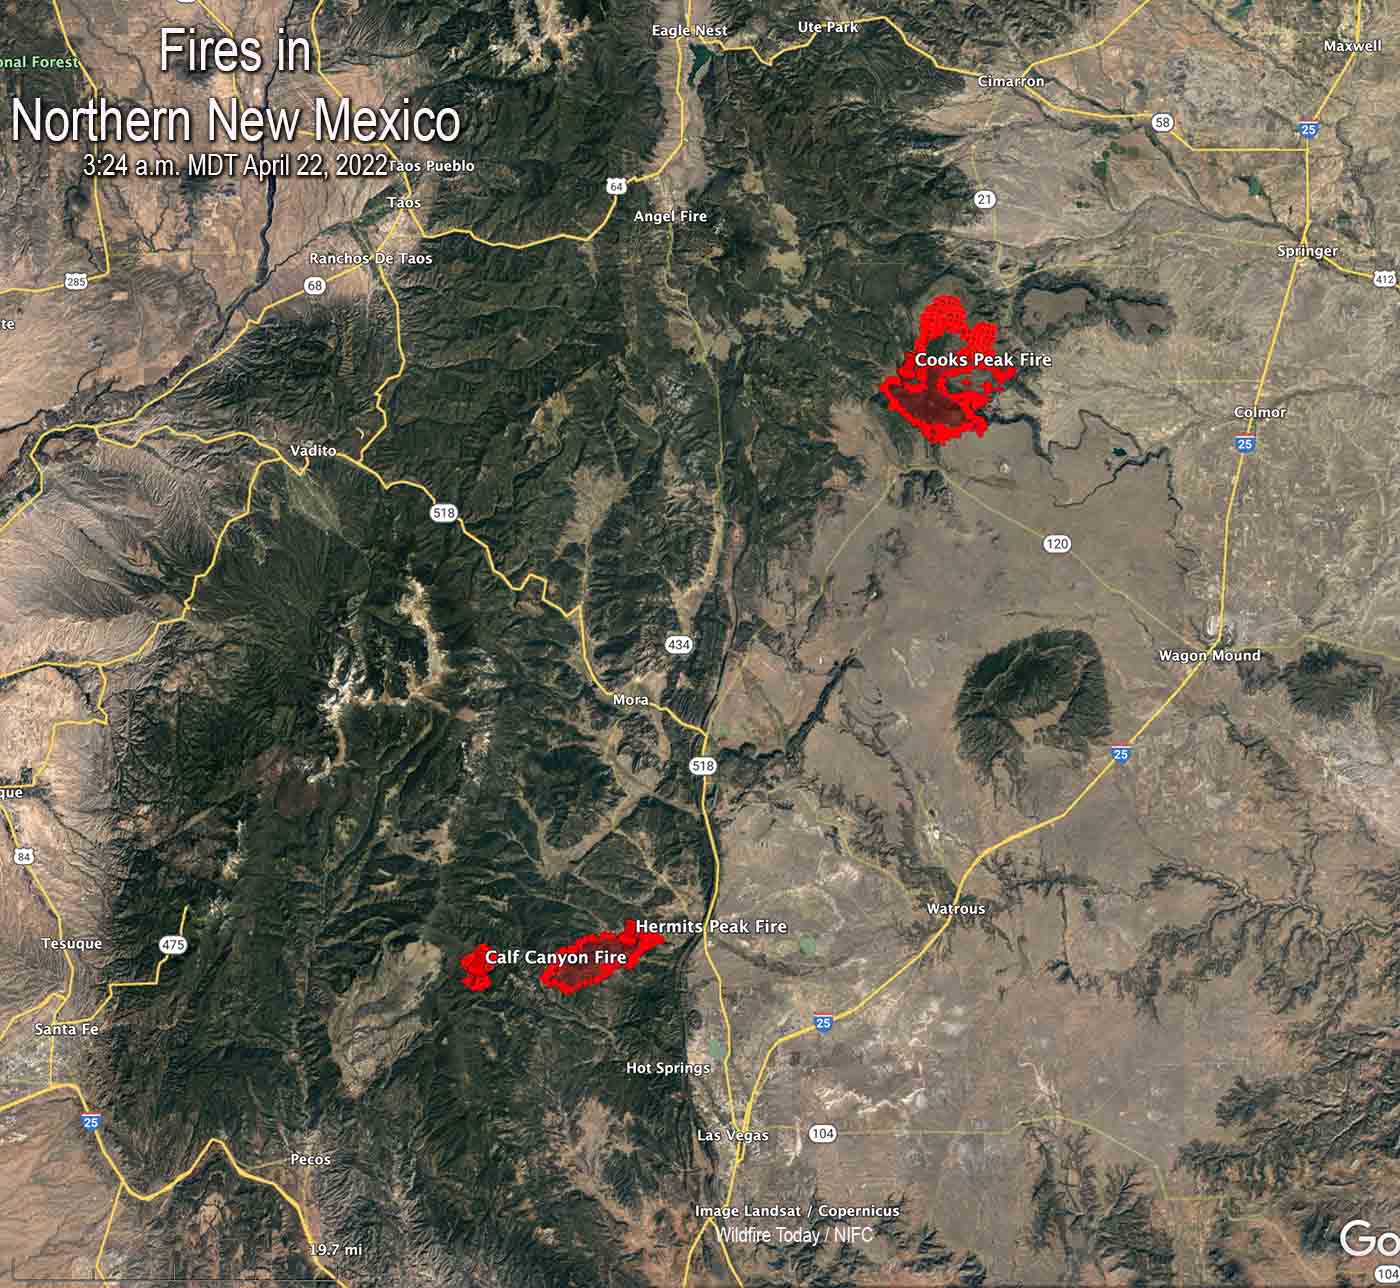 Map of fires in Northern New Mexico April 22, 2022